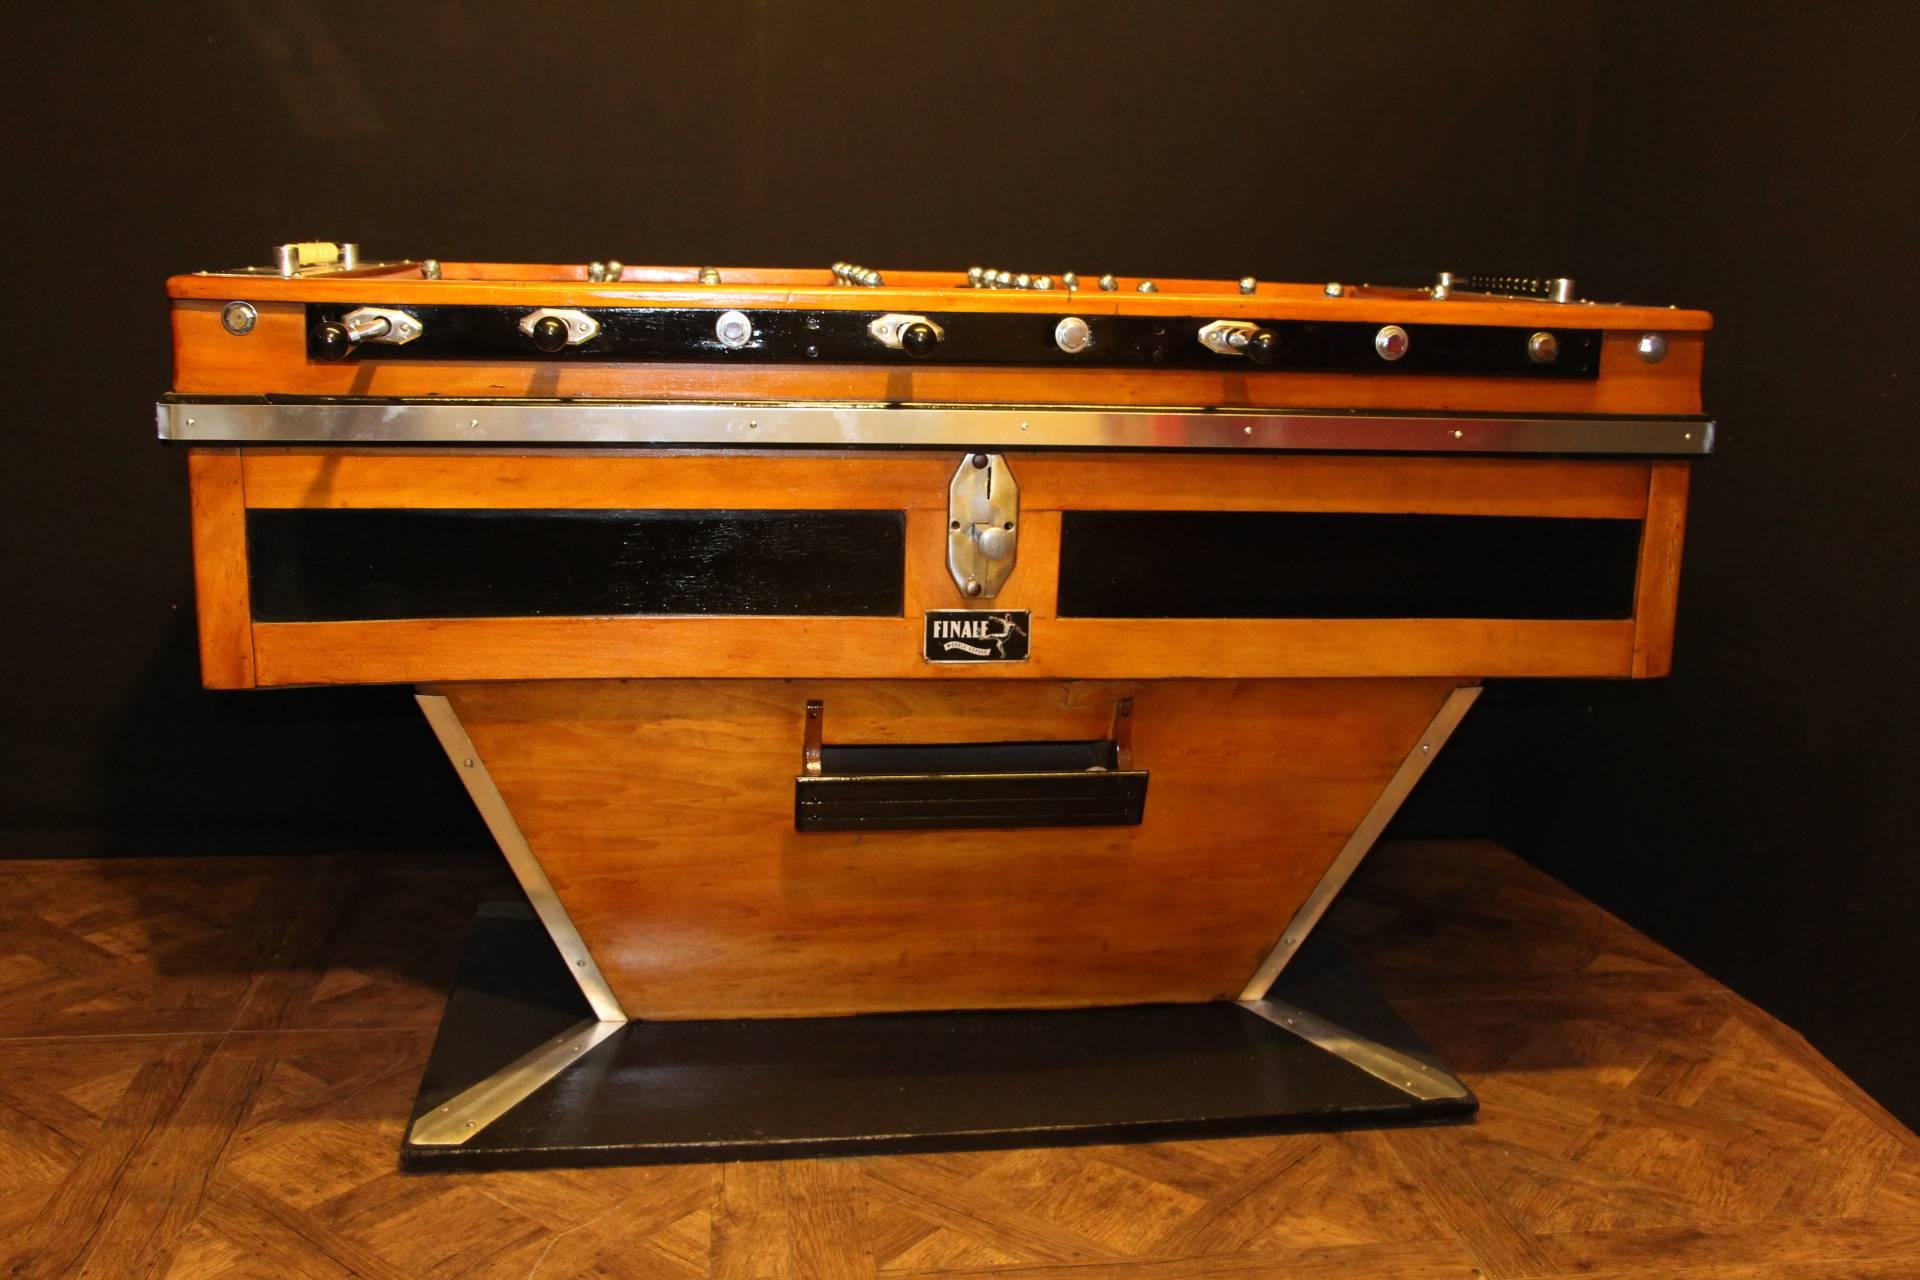 This magnificent French beechwood and ebonized table on shaped supports has got black and silver steel players and polished aluminum fittings. It is a beautiful decorative piece as well as a fabulous game table in working order.
Originally, it was